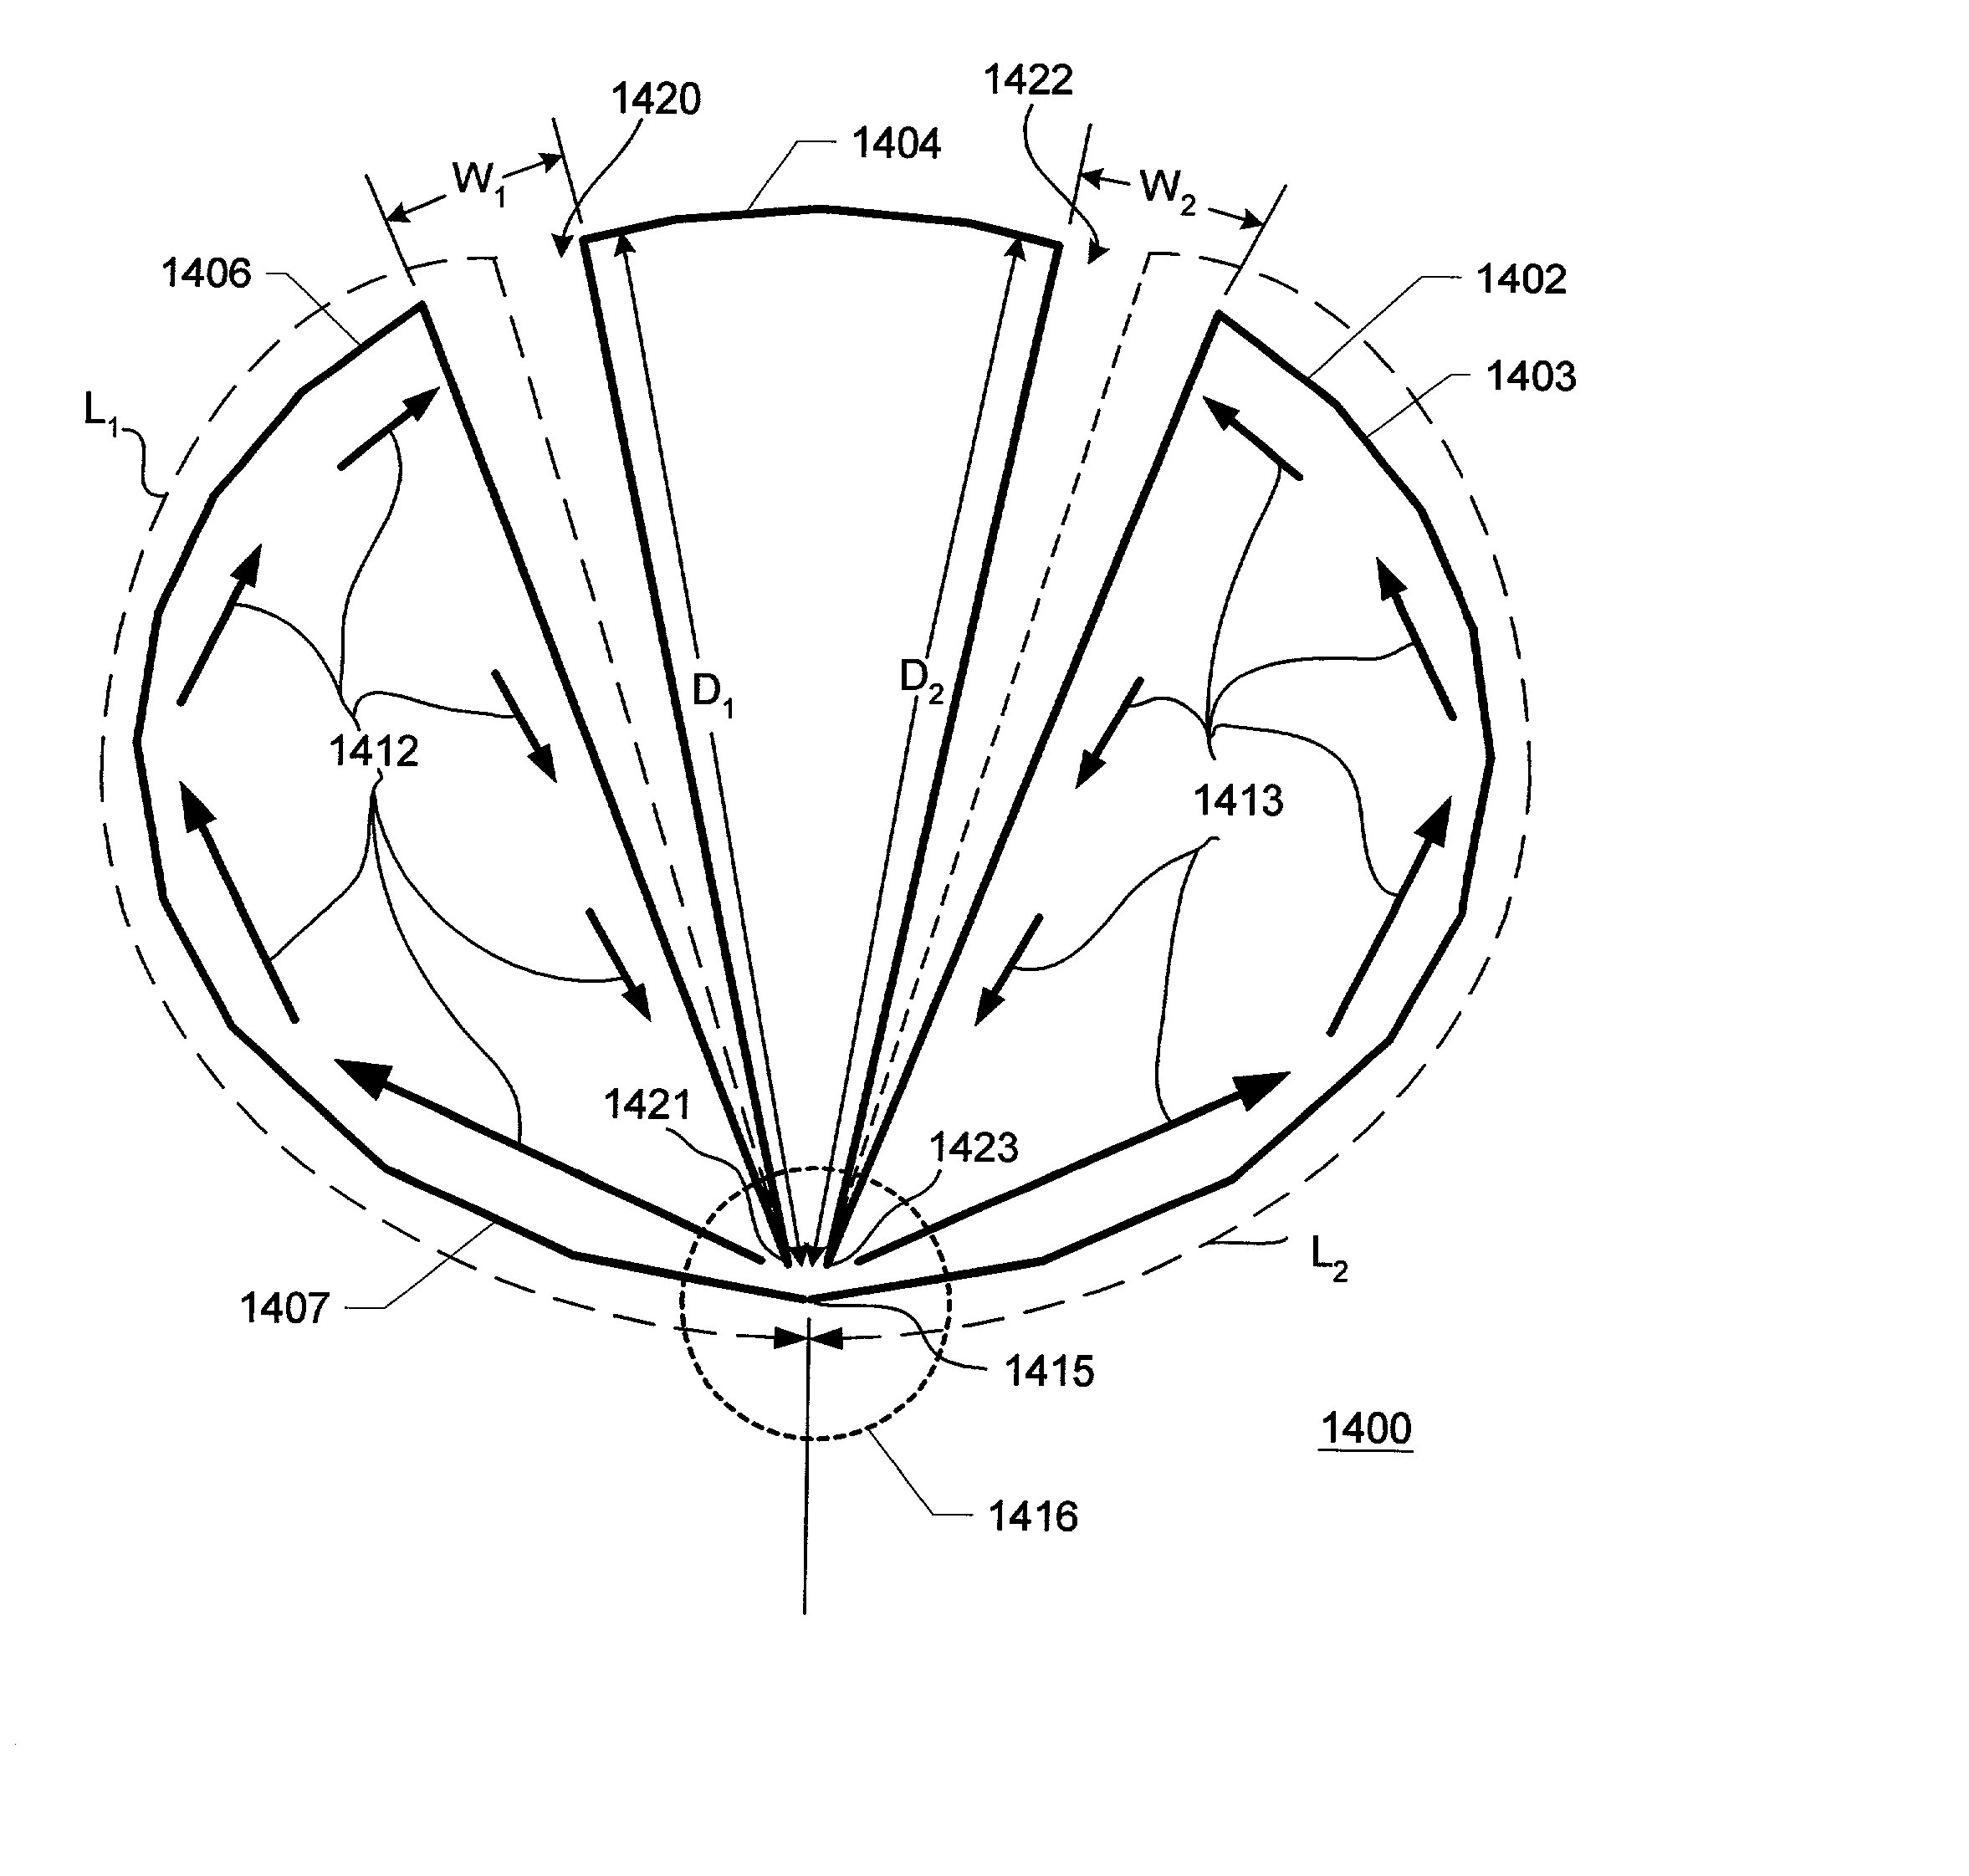 Ultra wideband antenna having frequency selectivity